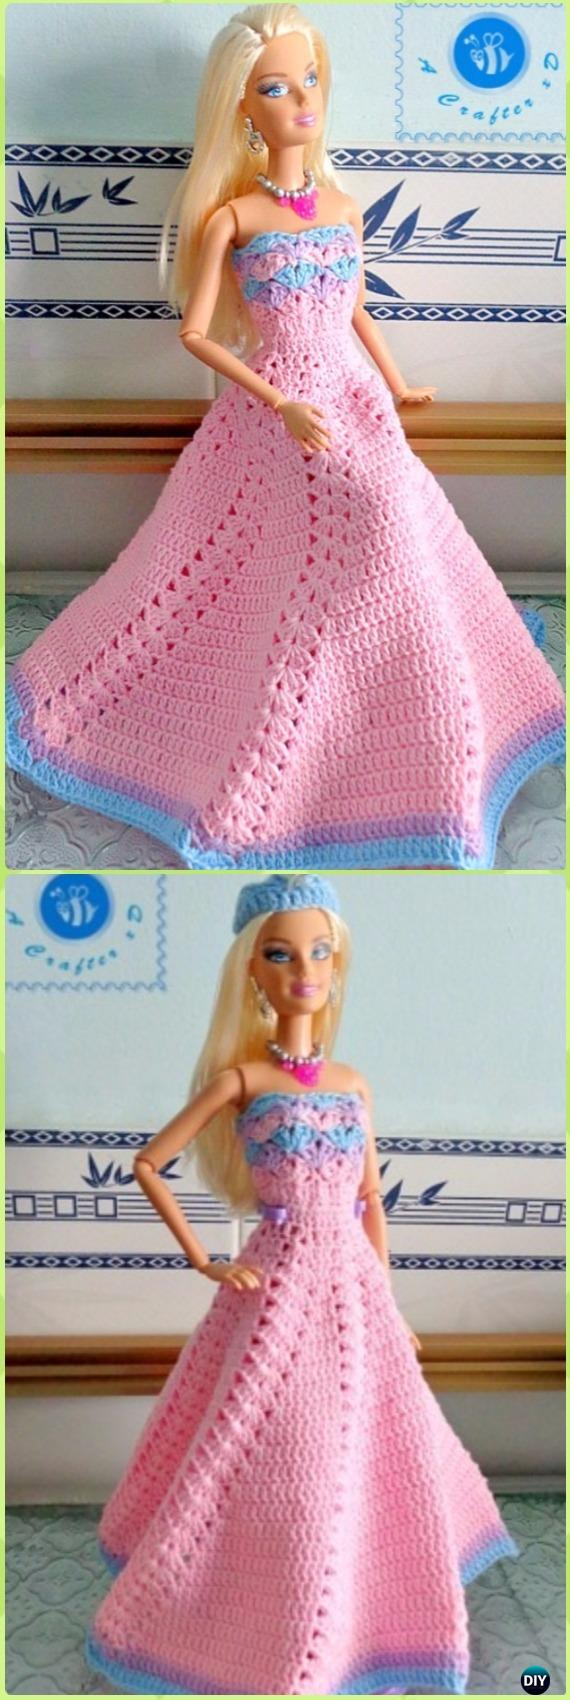 Crochet Clothing Patterns Crochet Barbie Fashion Doll Clothes Outfits Free Patterns